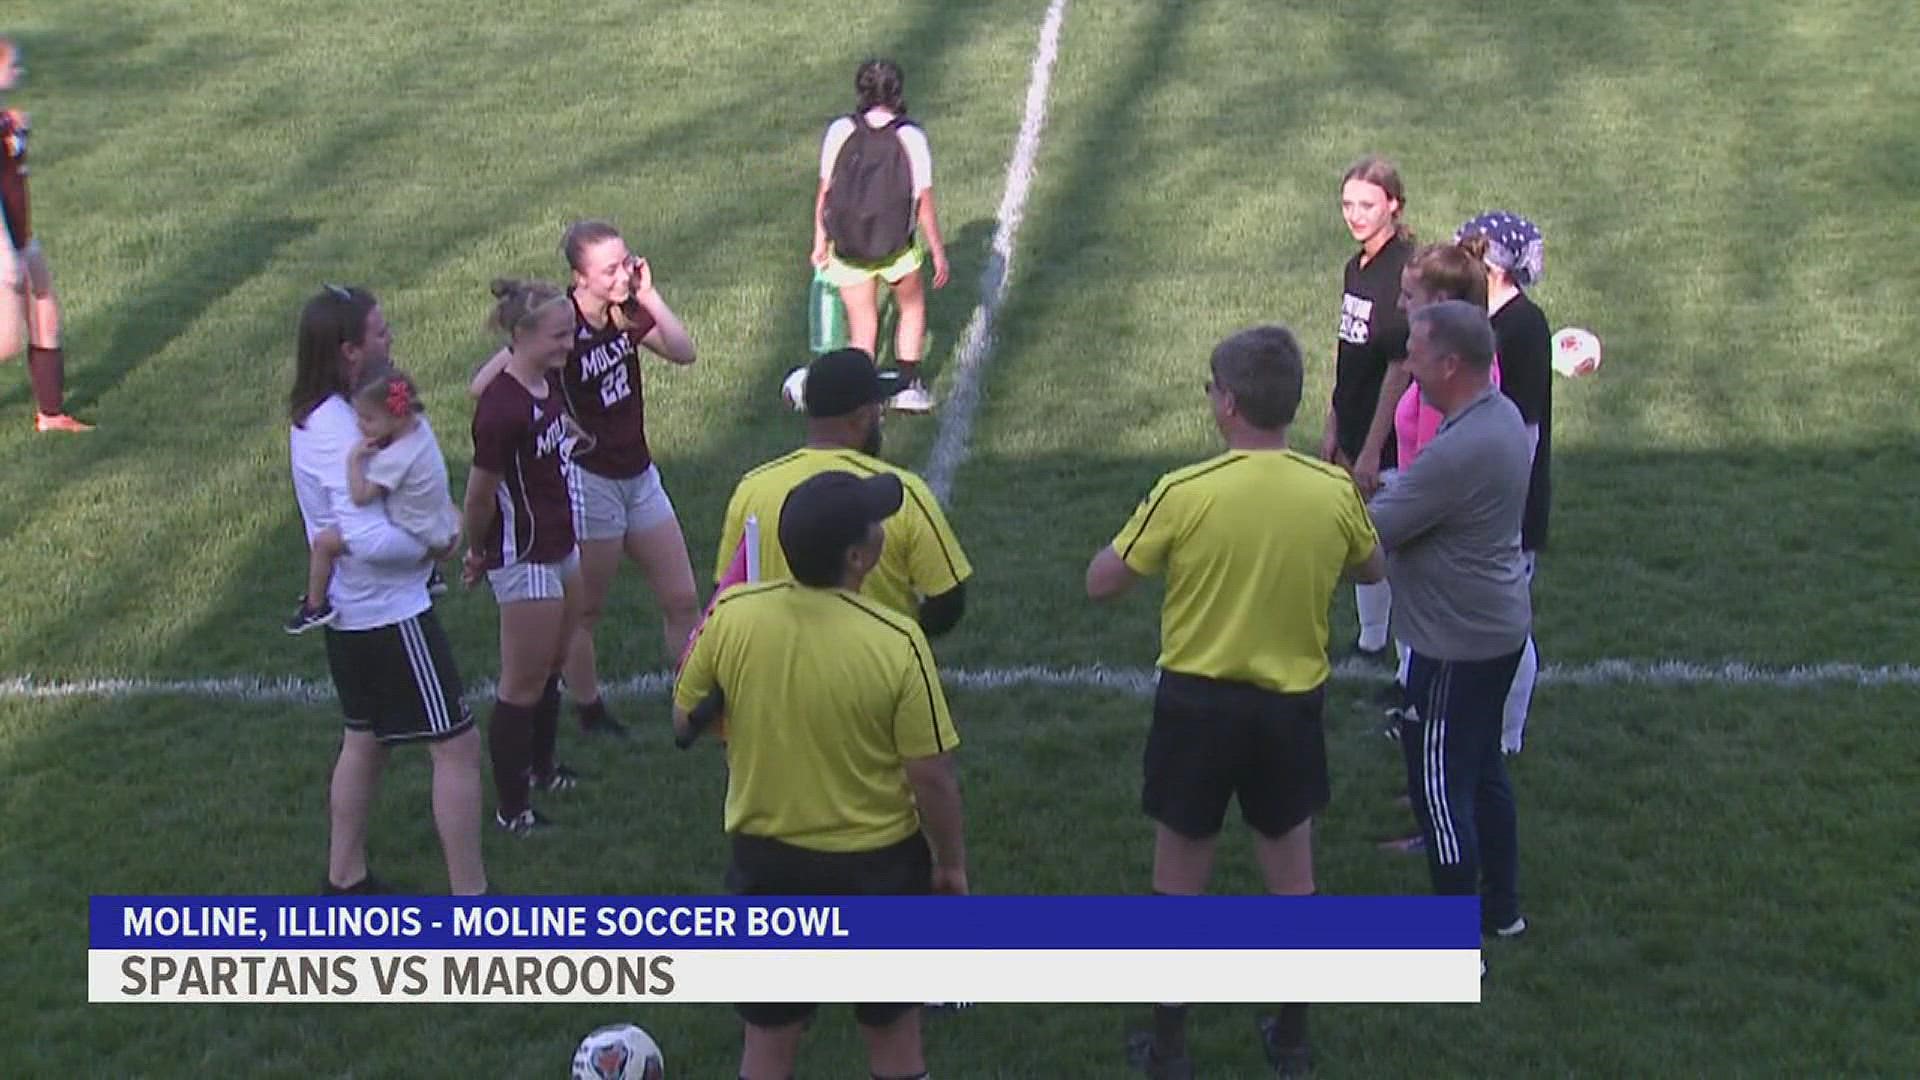 The Spartans scored three times in the second half to down the Maroons in the regular-season finale.